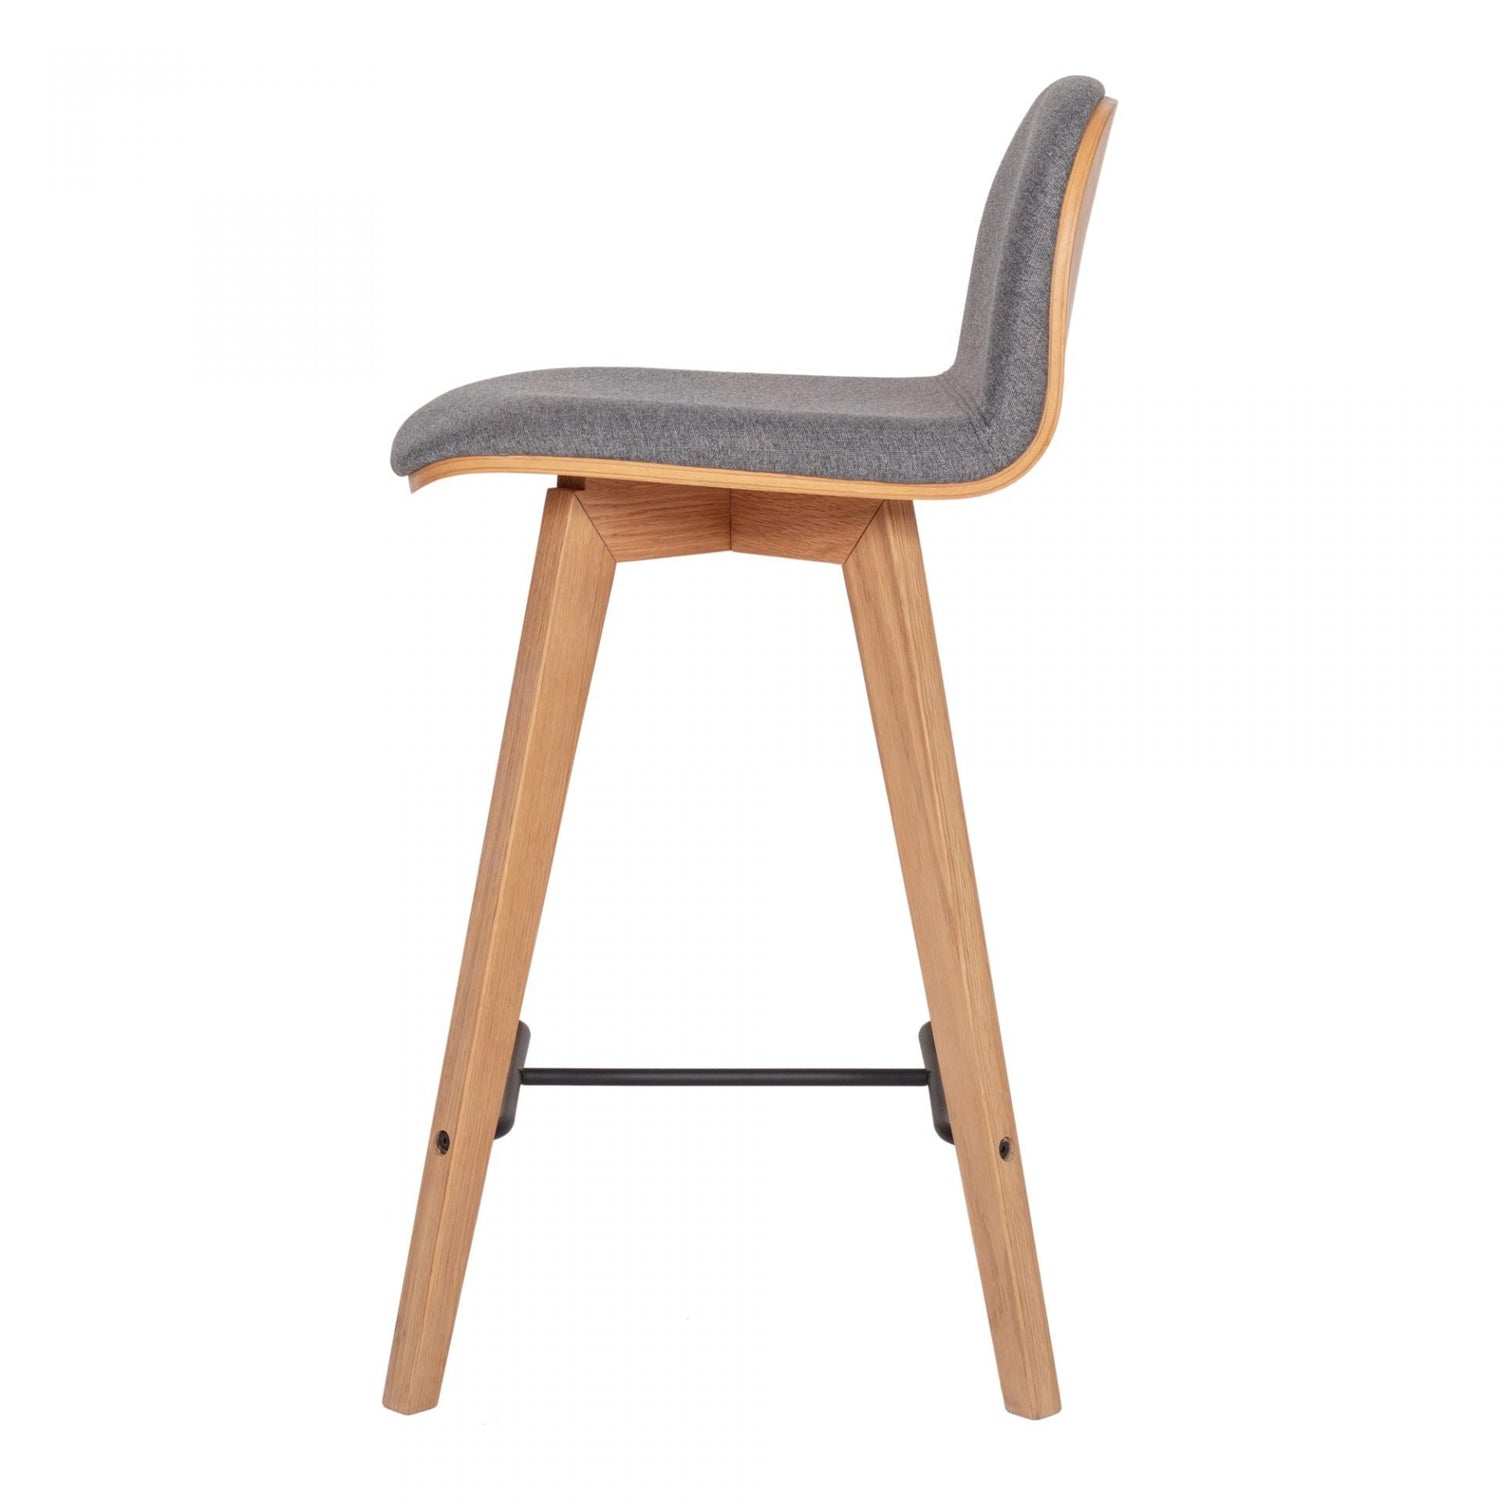 Counter Stool: Stylish Seating at the Counter